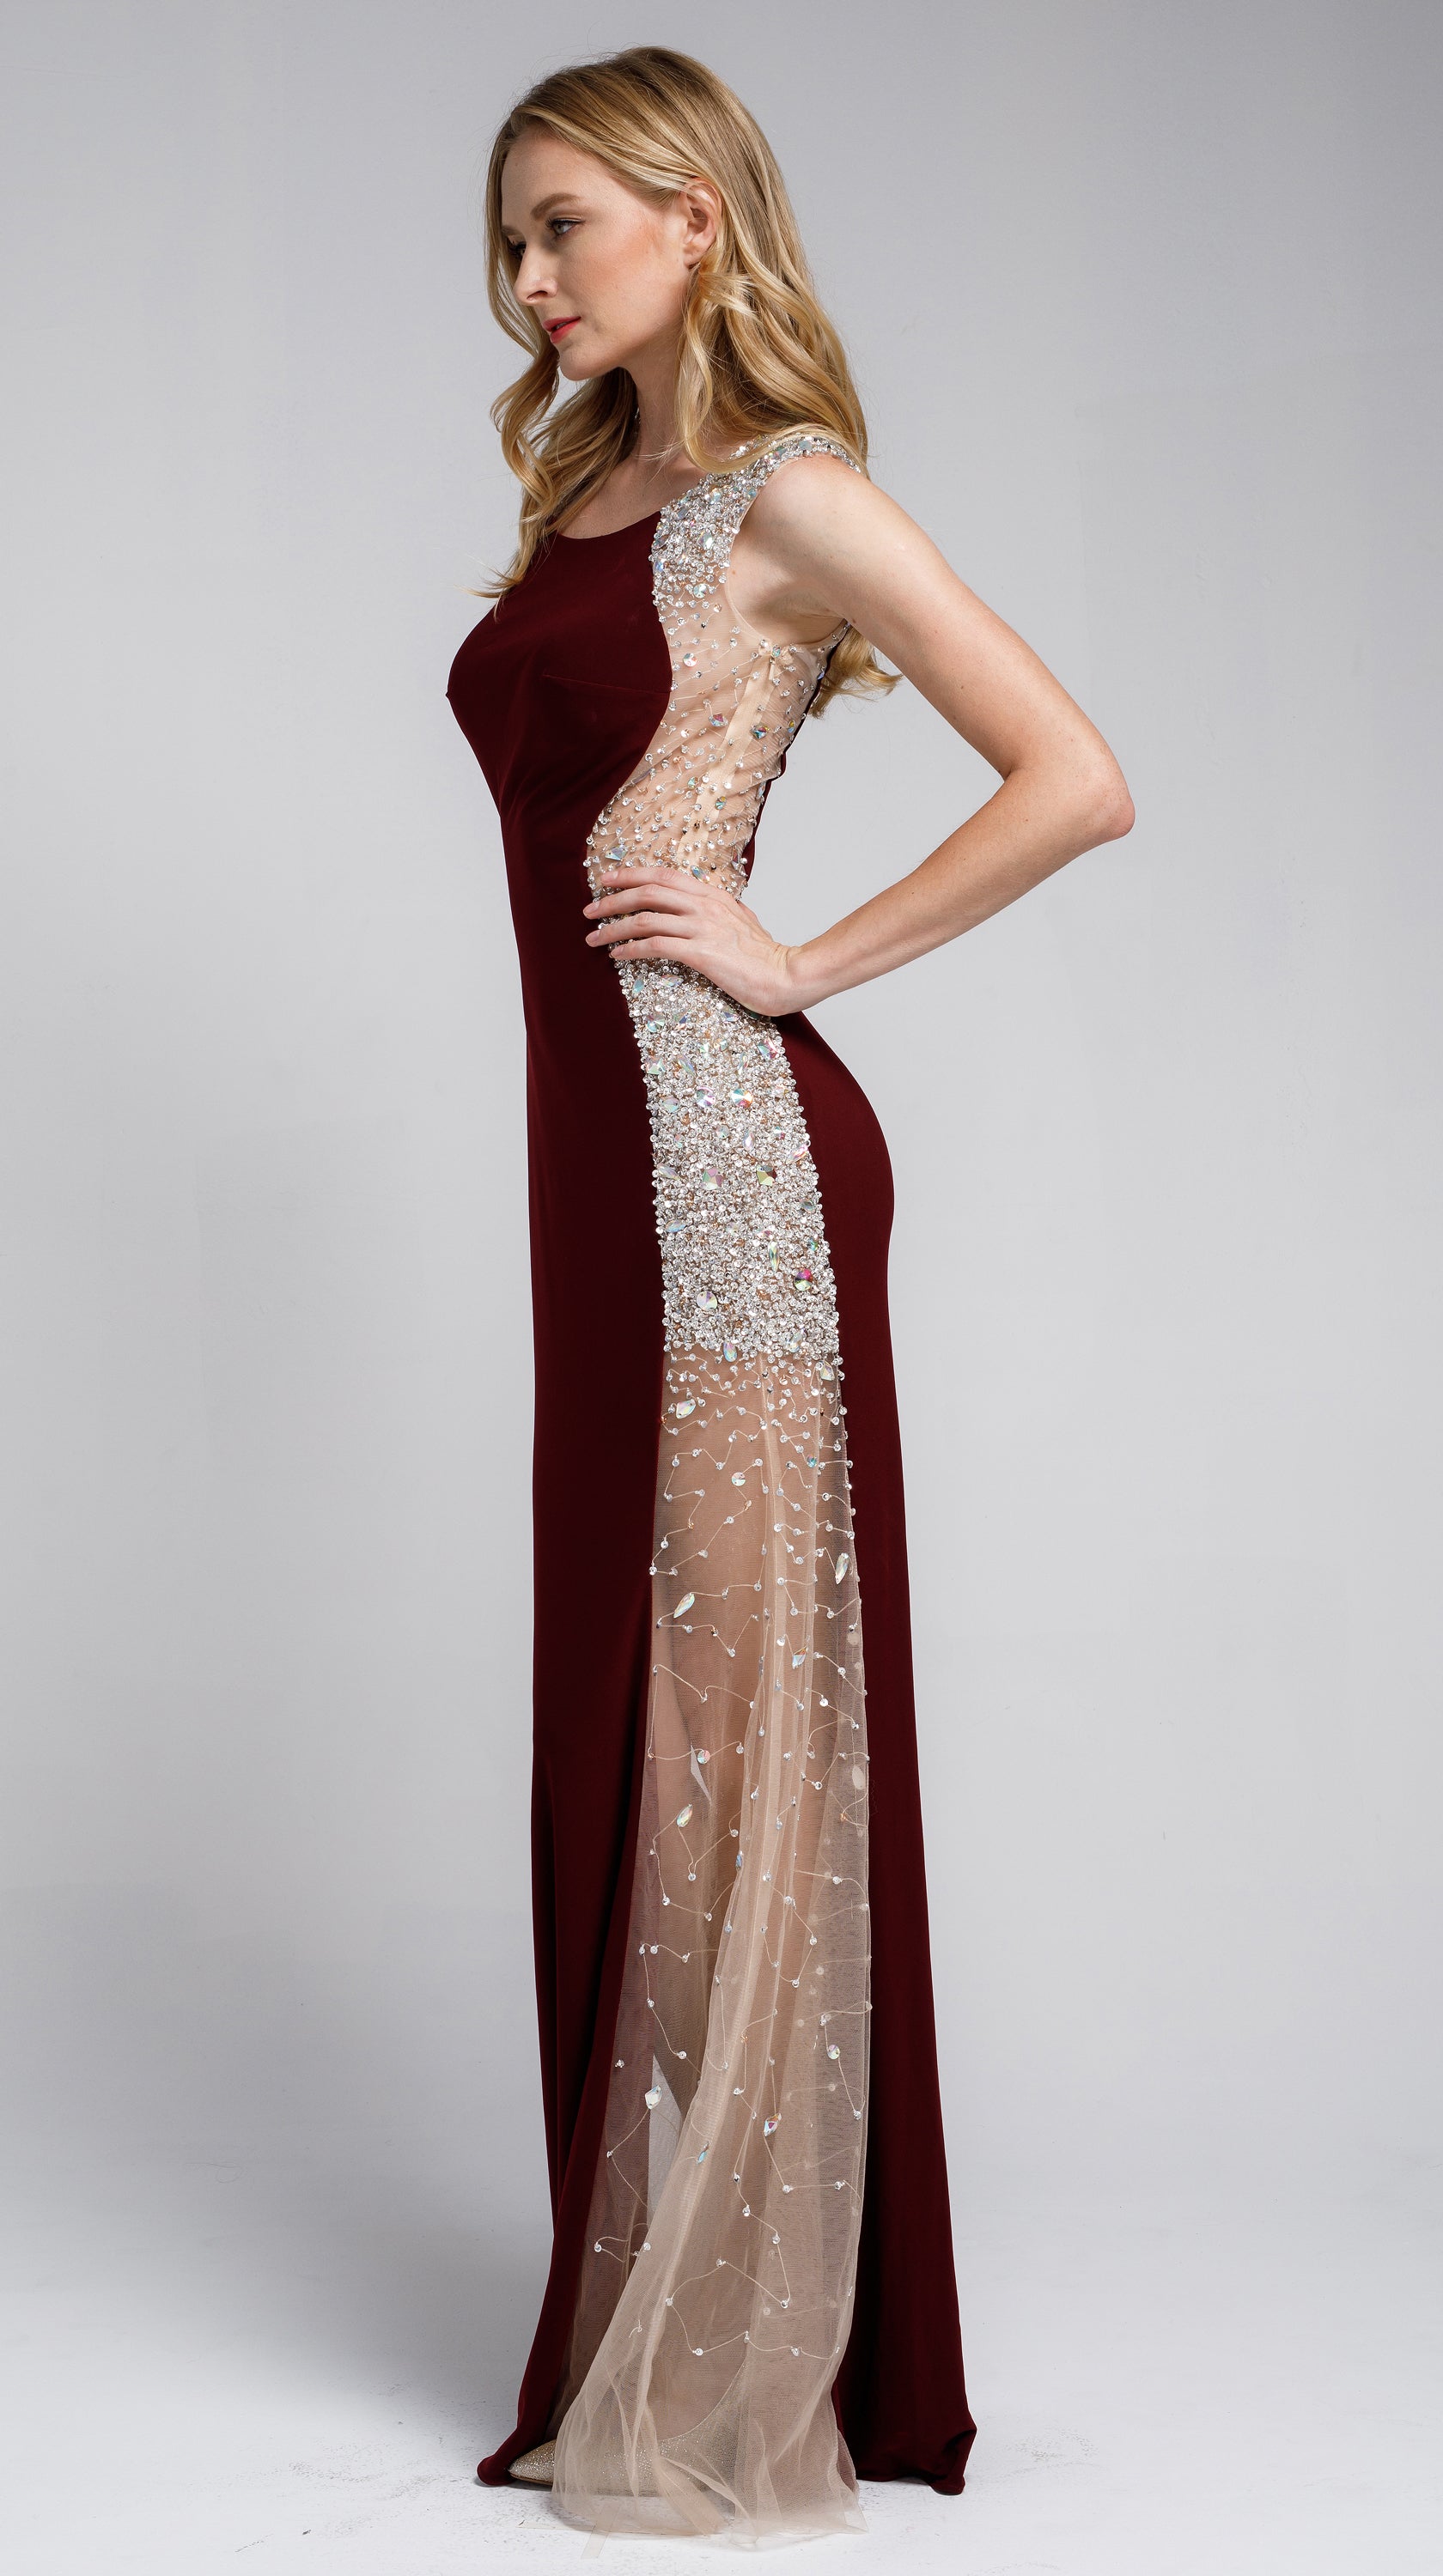 Image of Silhouette Styles Prom Gown With Rhinestone Accents in an alternative image